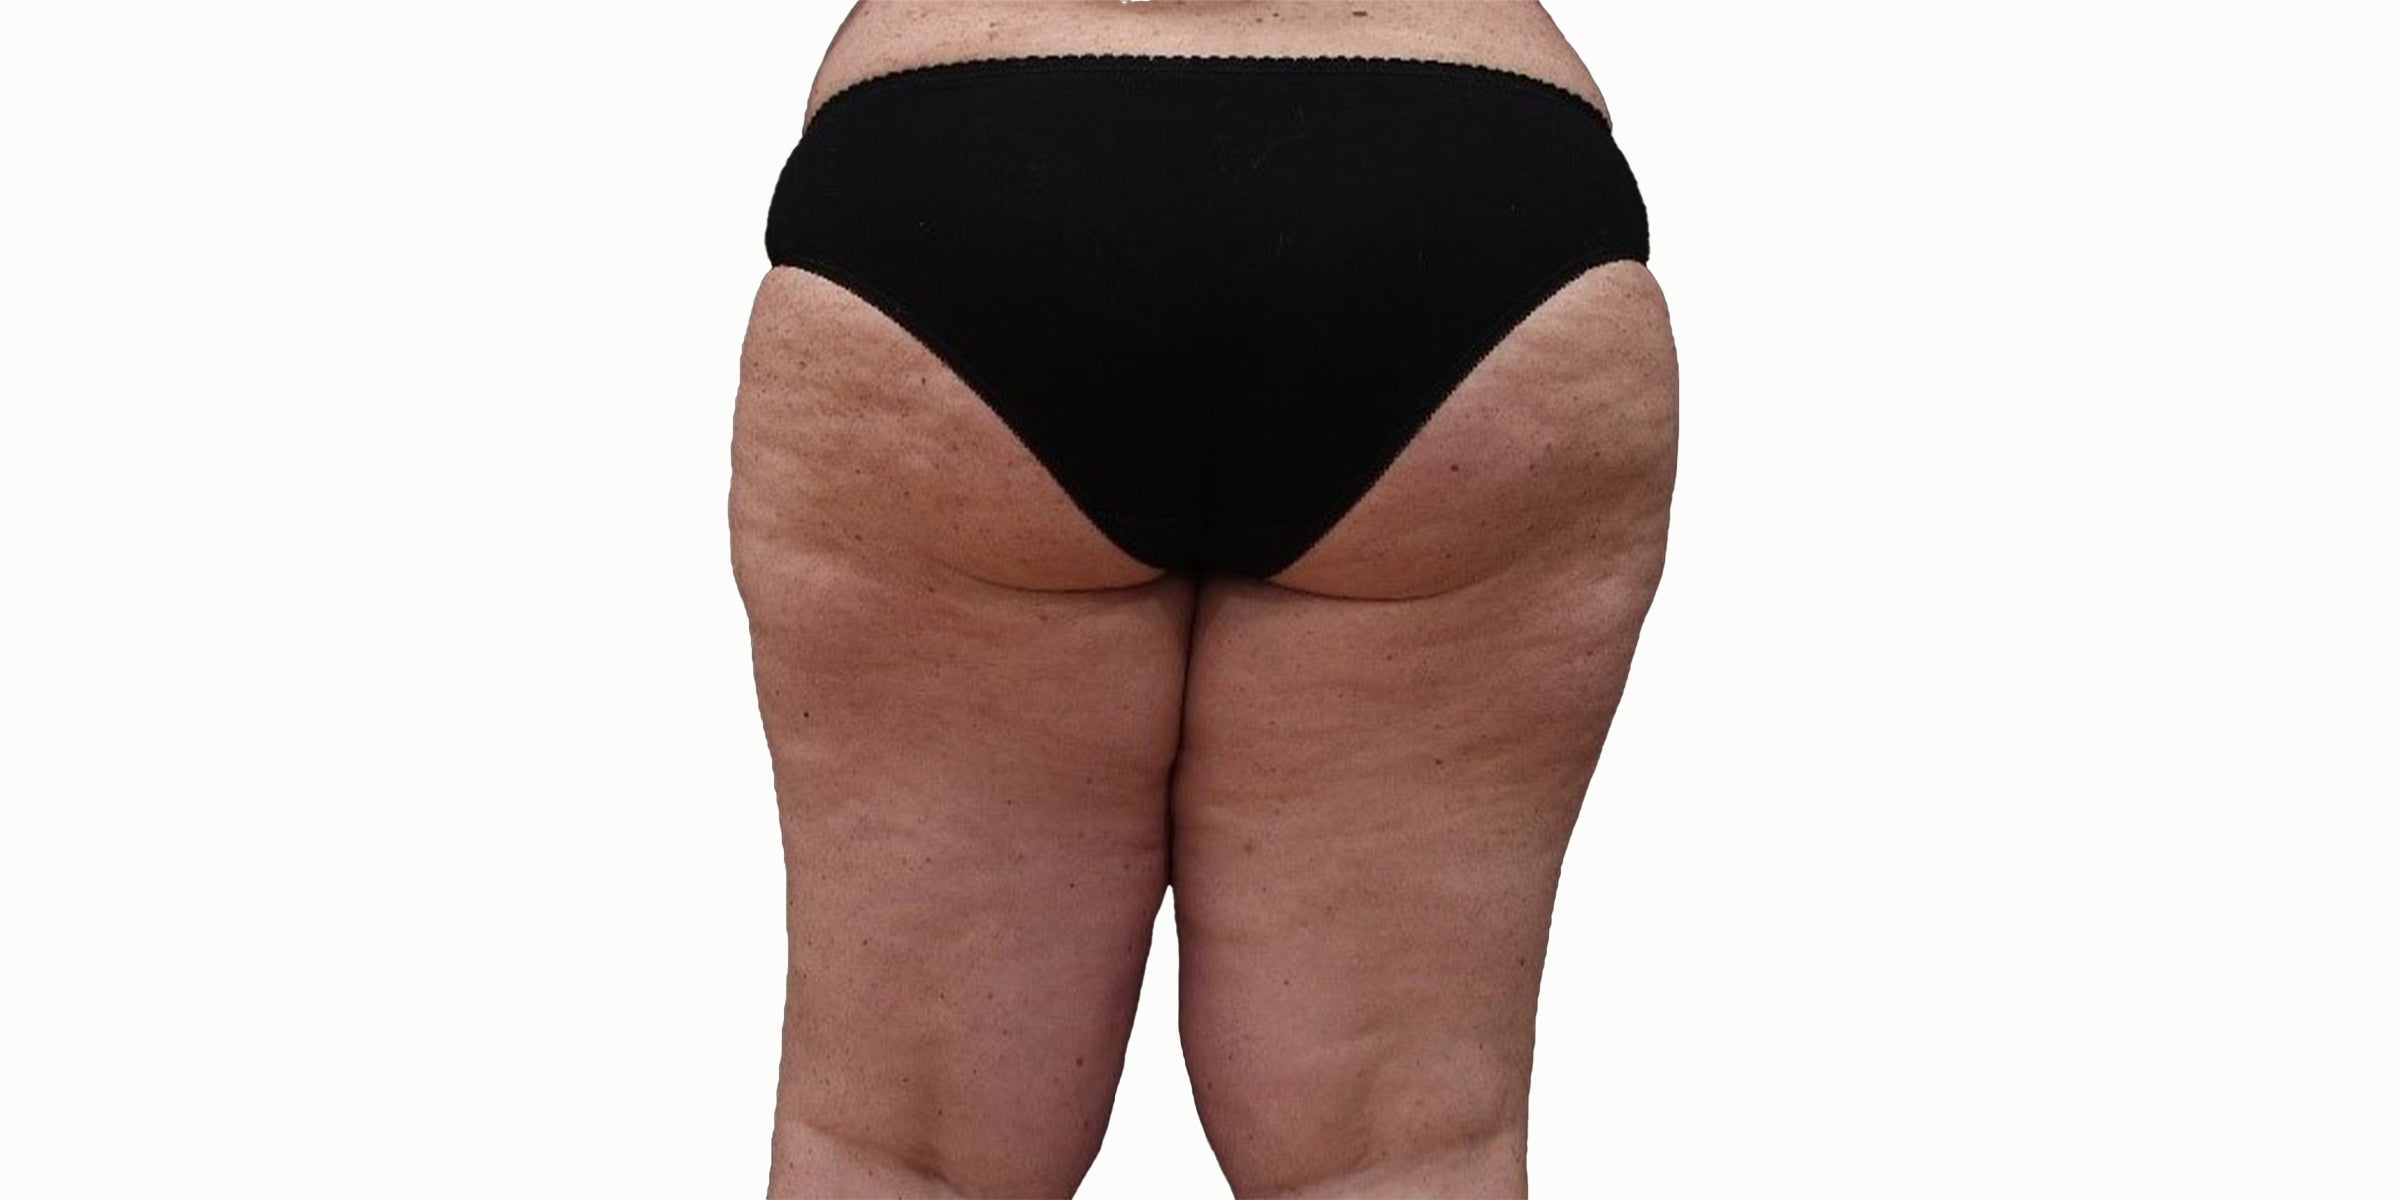 Legology cellulite before and after images